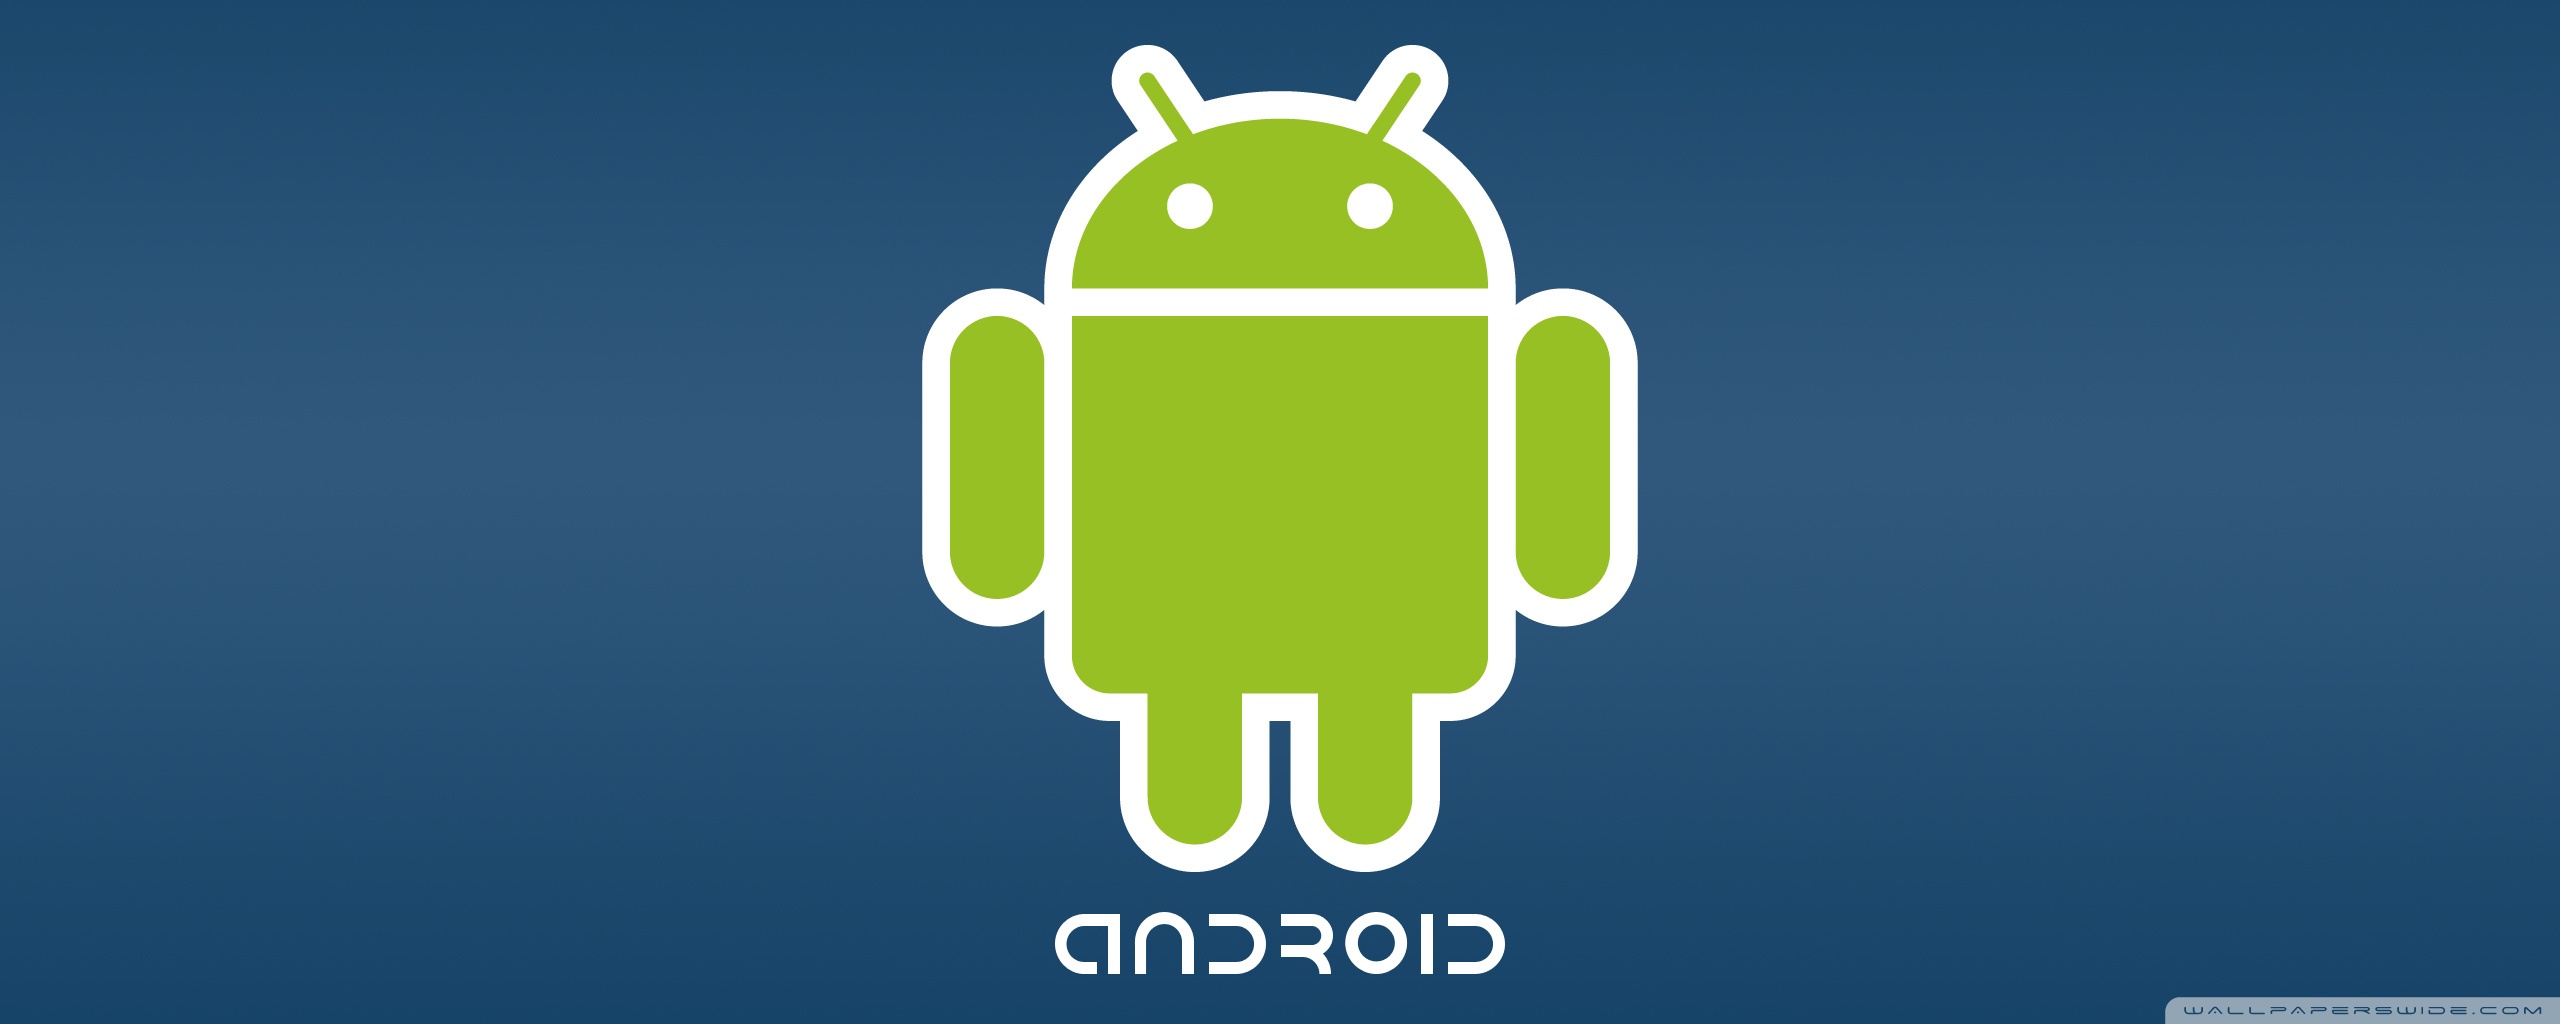 Android Logo Wallpaper Download